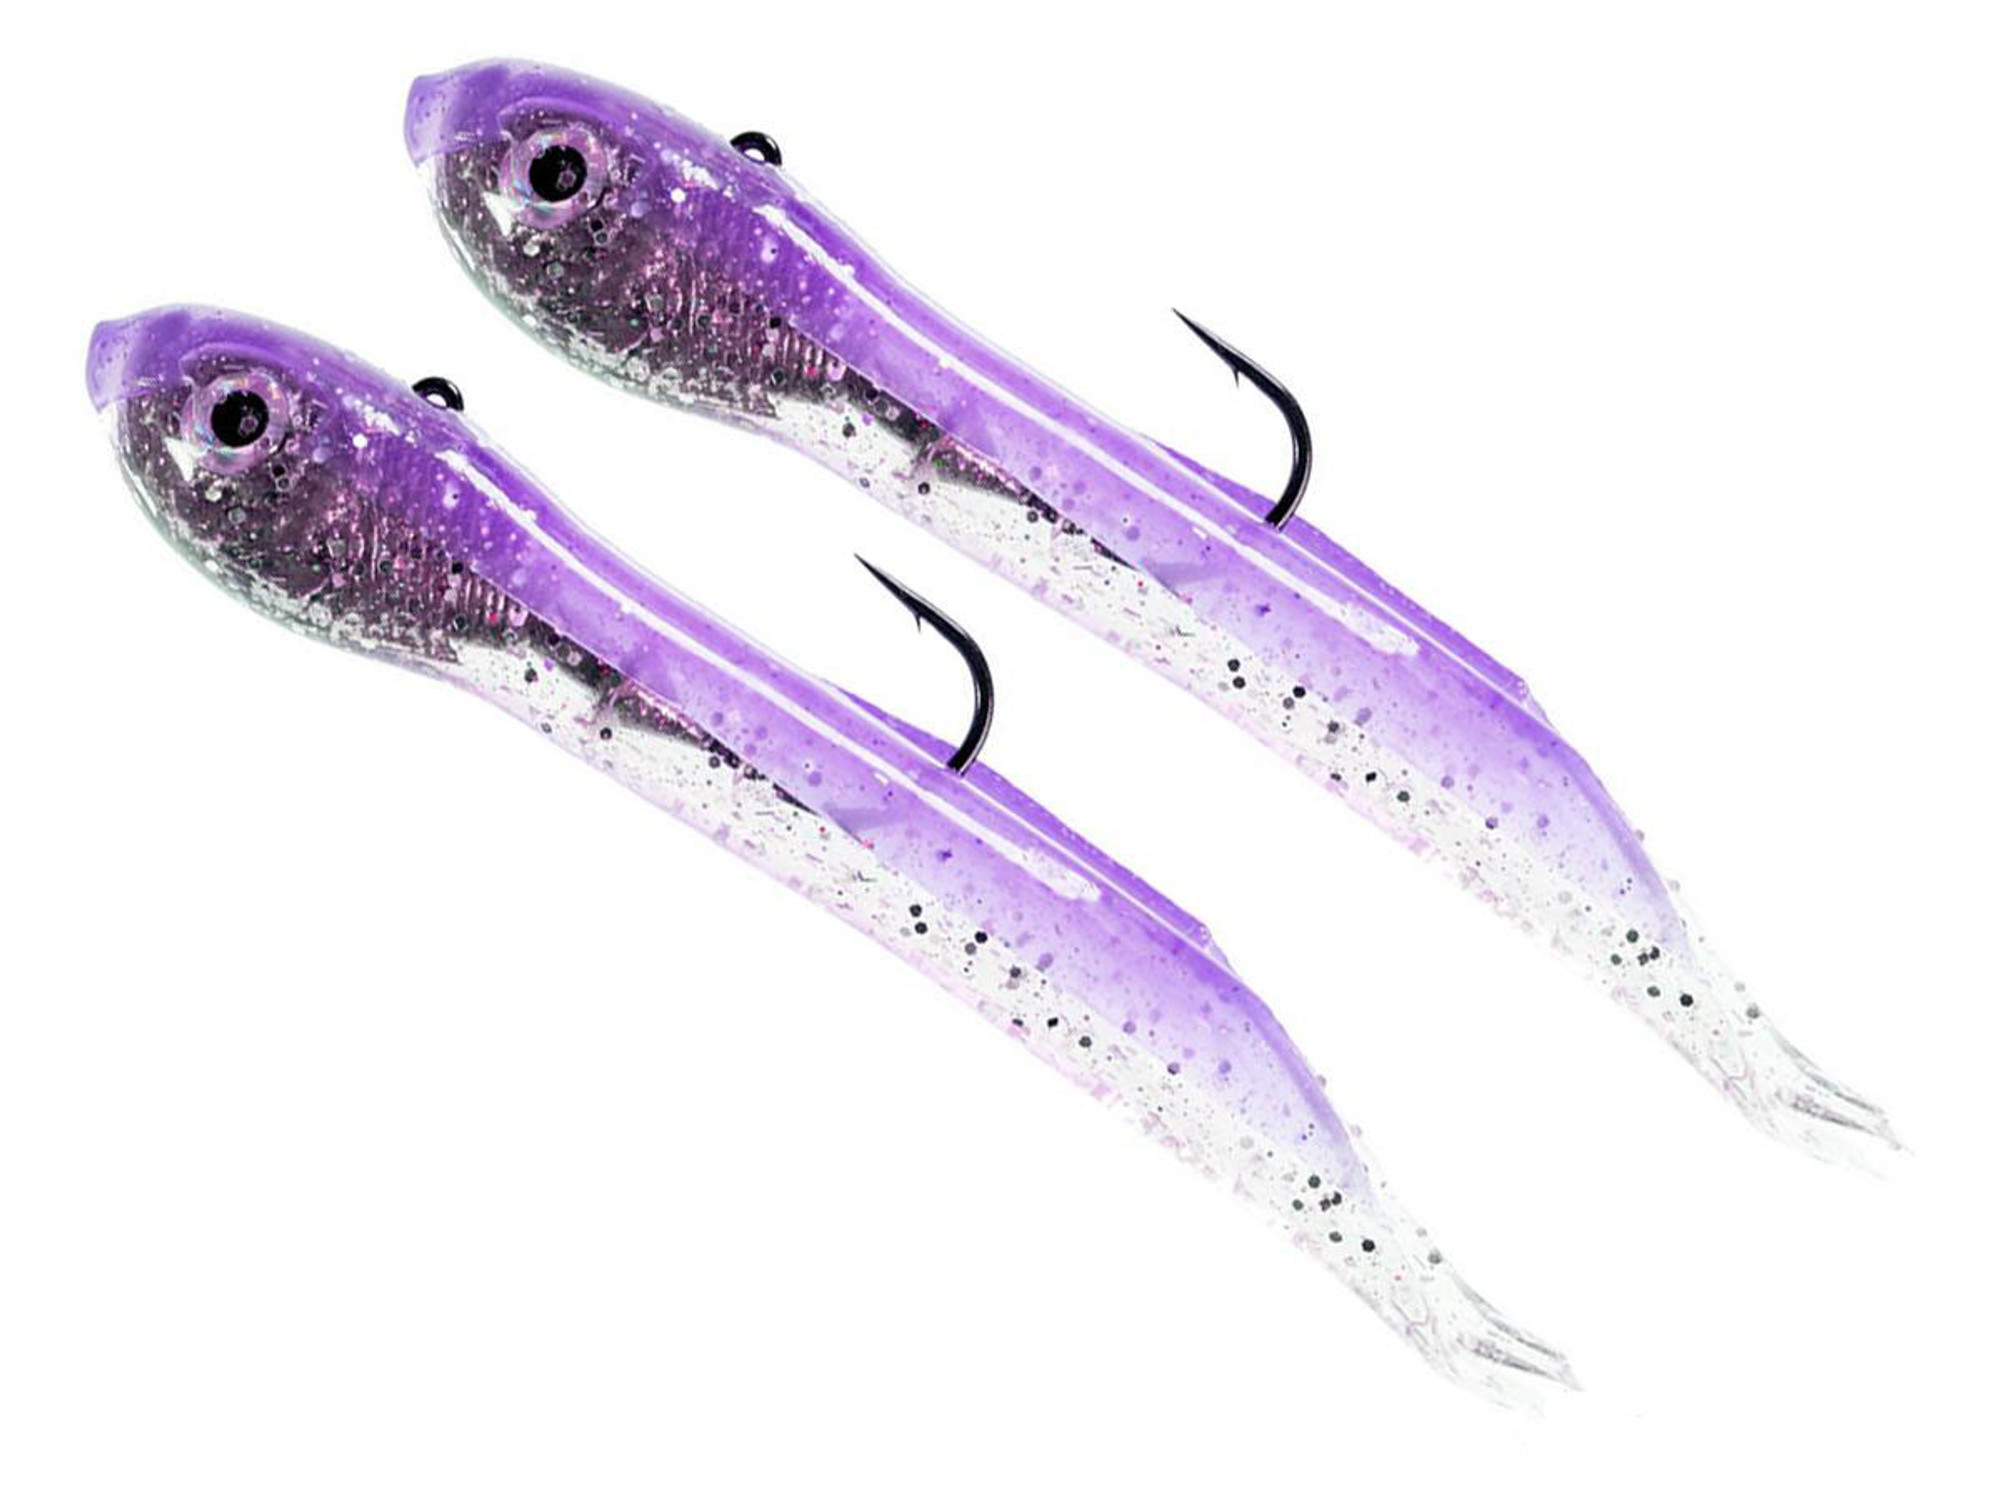 Hook Up Baits Handcrafted Soft Fishing Jigs - Purple Silver / 4" / 1 oz